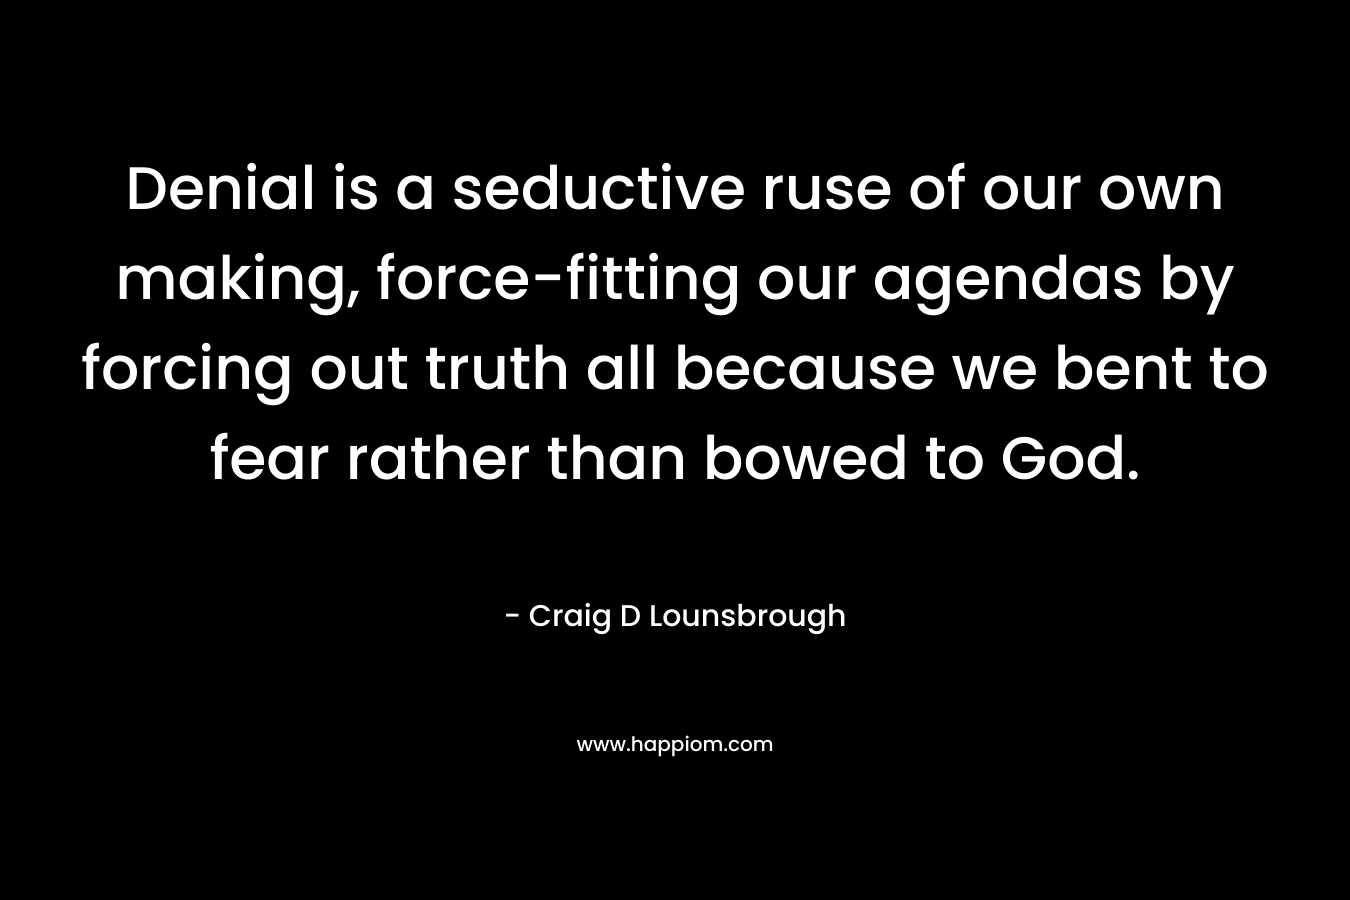 Denial is a seductive ruse of our own making, force-fitting our agendas by forcing out truth all because we bent to fear rather than bowed to God. – Craig D Lounsbrough